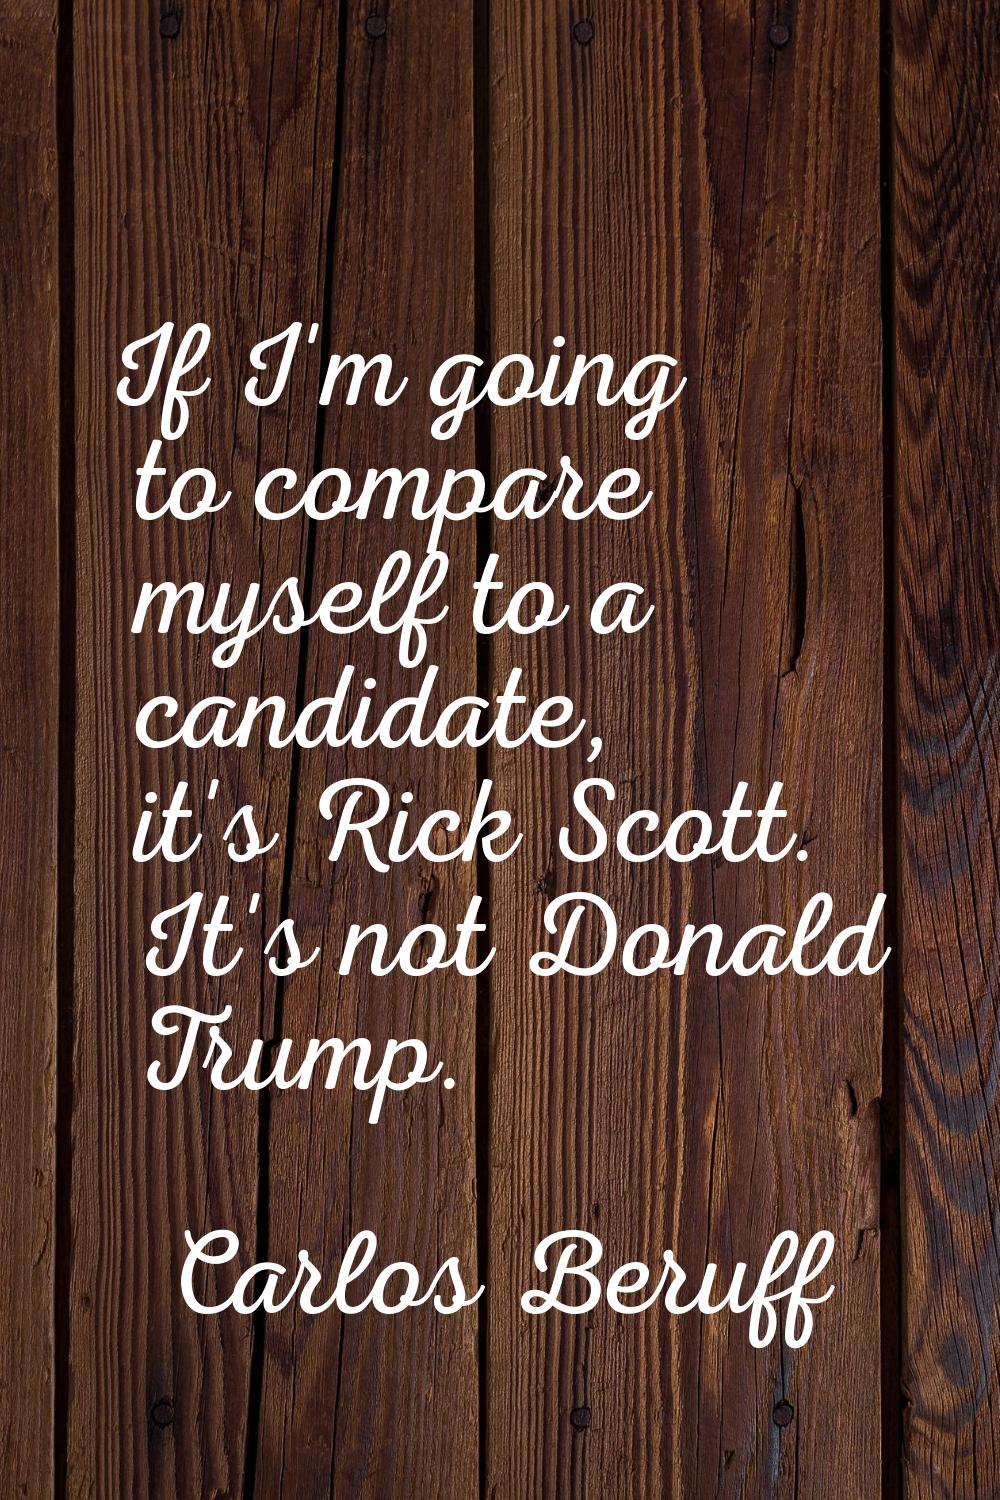 If I'm going to compare myself to a candidate, it's Rick Scott. It's not Donald Trump.